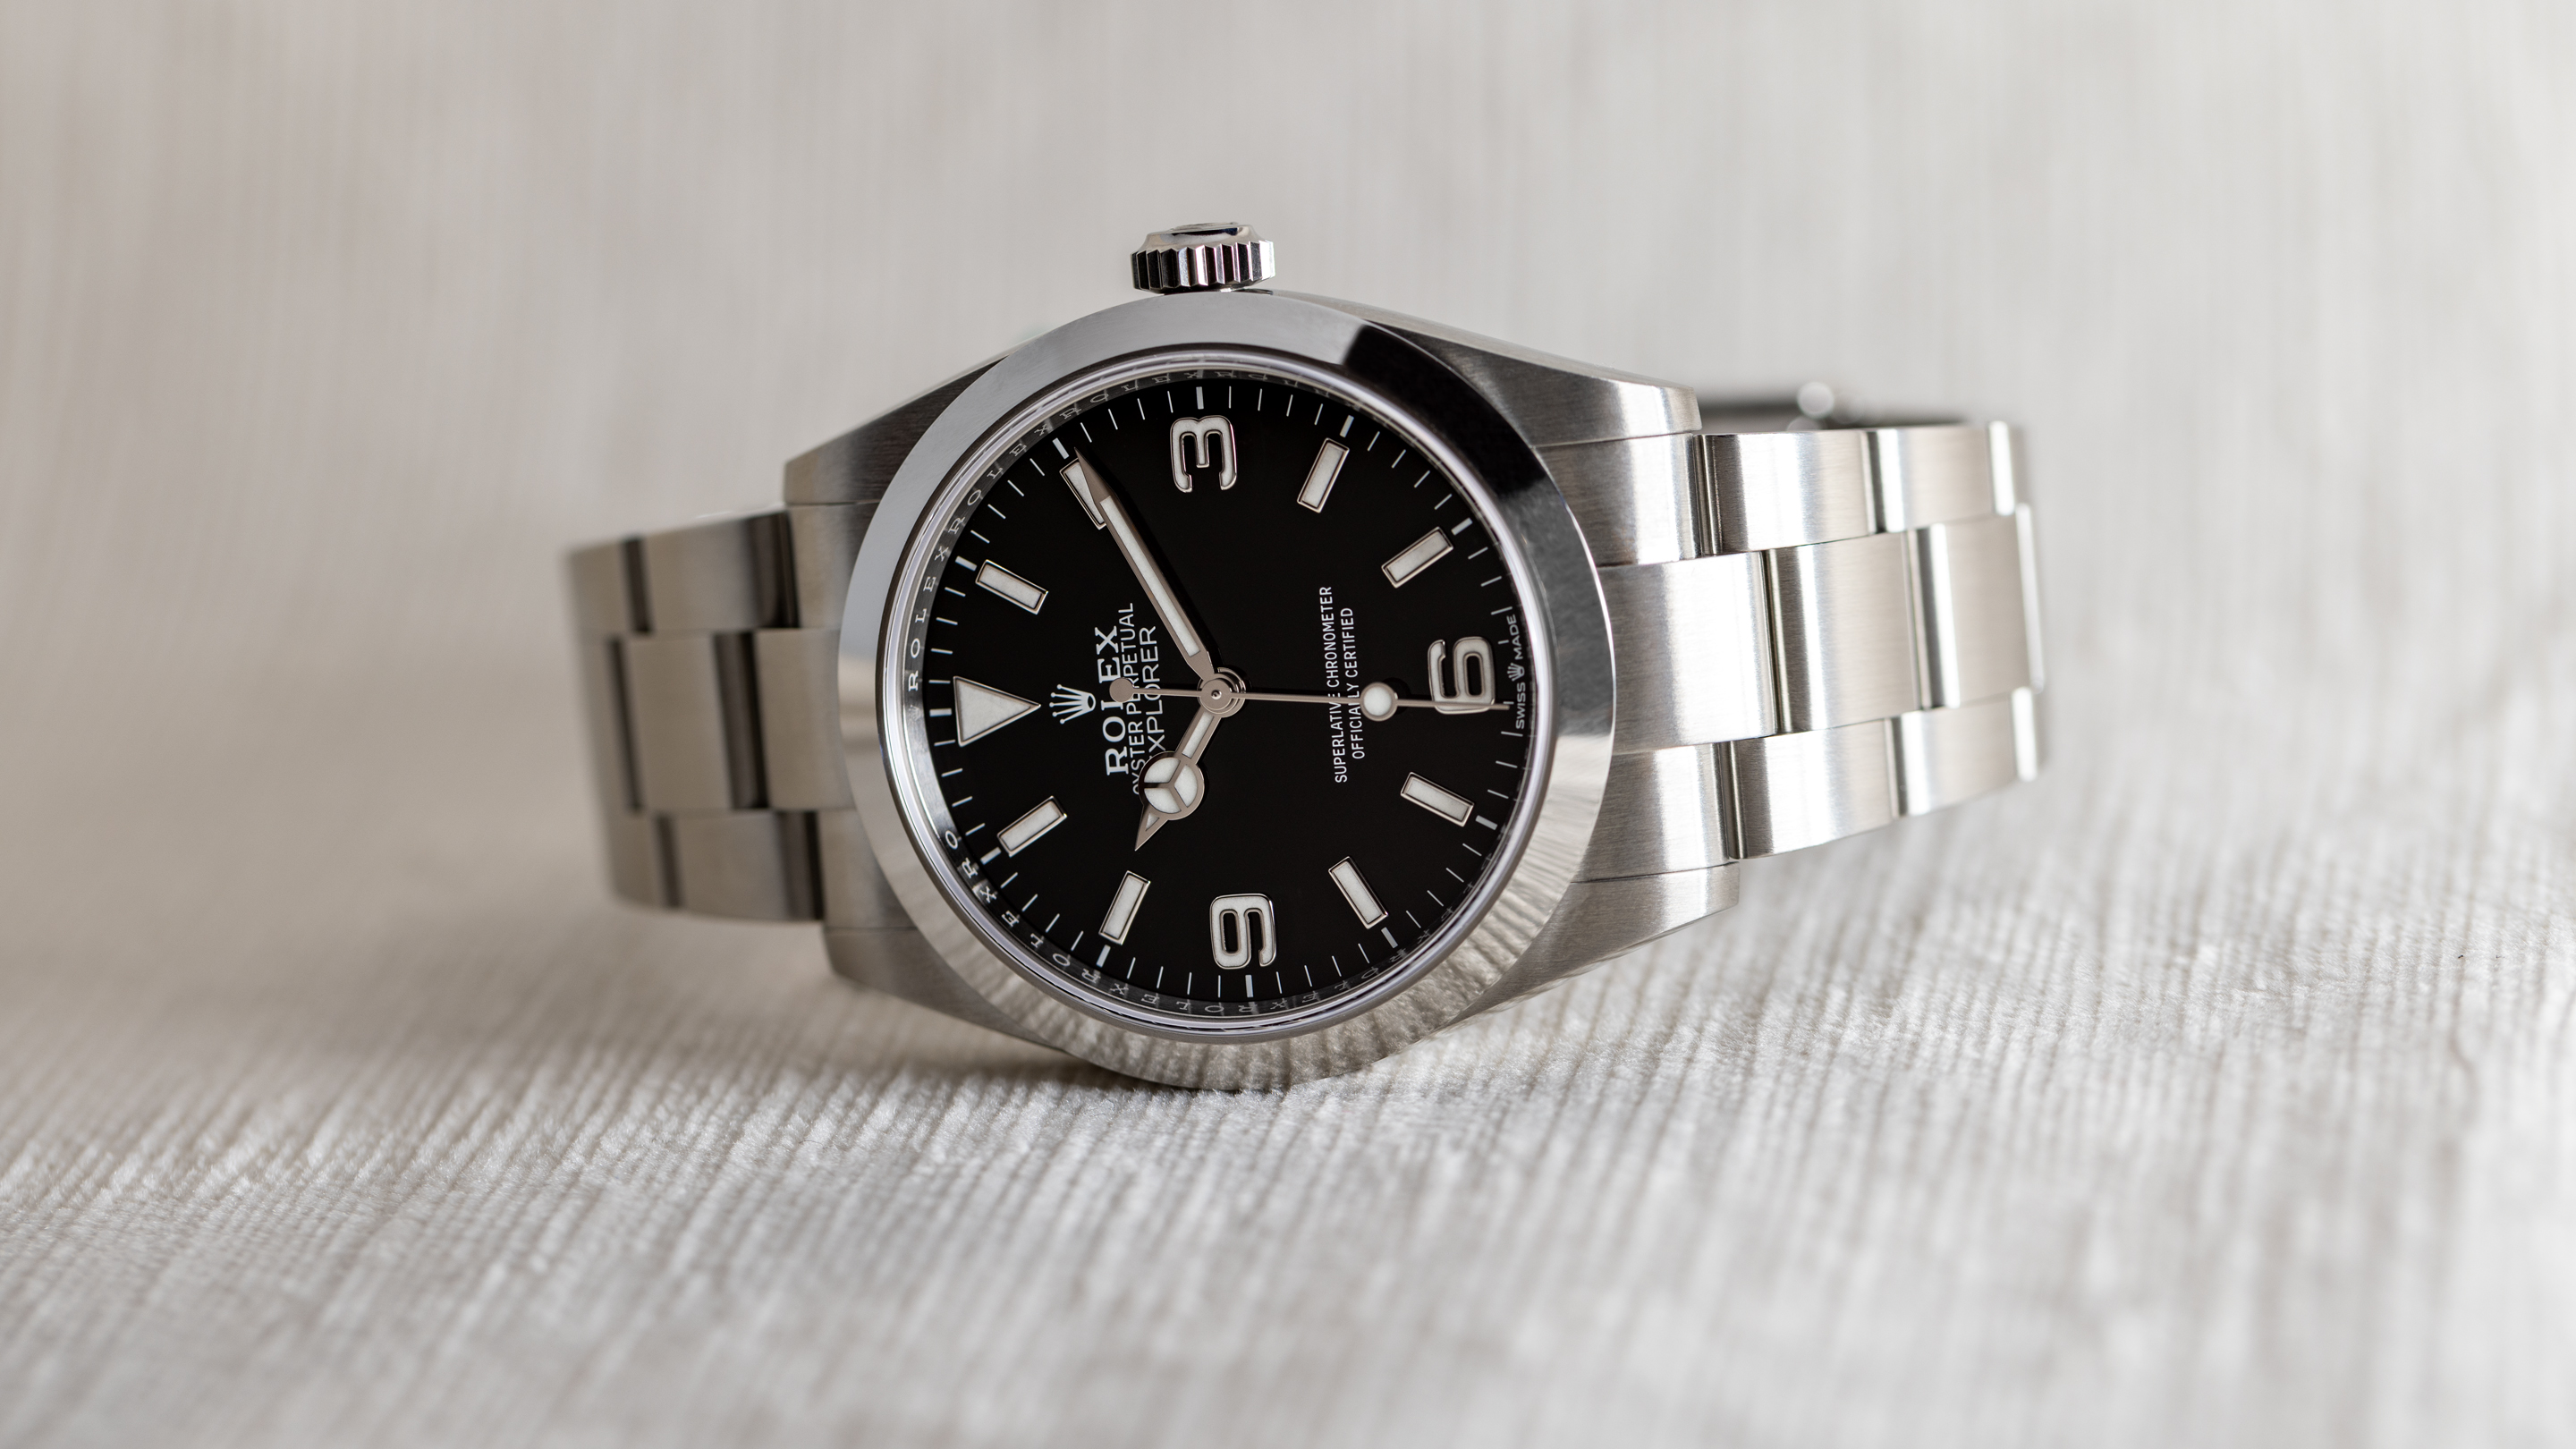 Hands-On With The Rolex Explorer